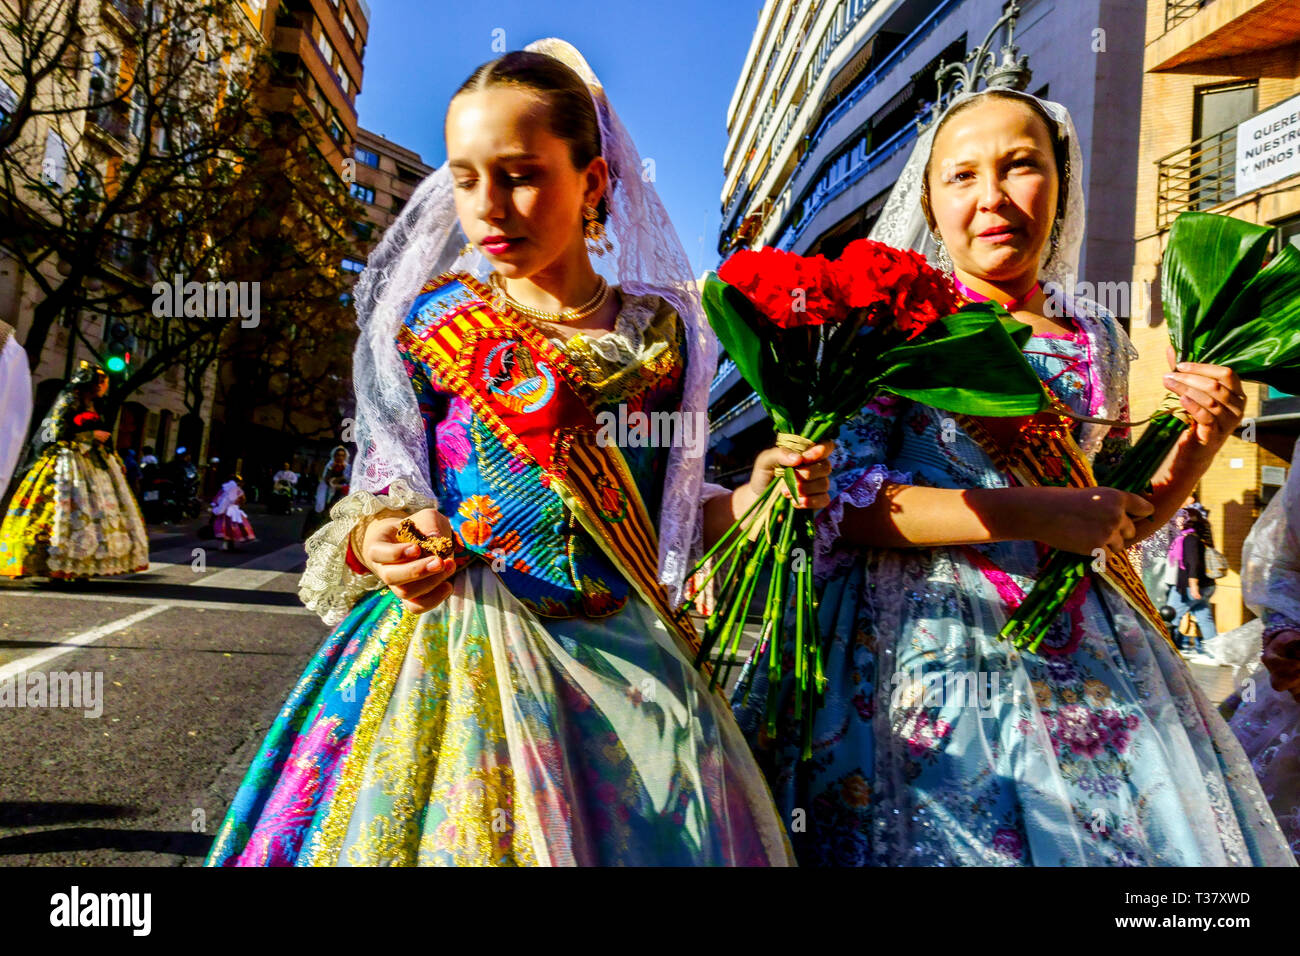 Las Fallas festival Valencia Women People in traditional dress colorful costumes marching to The Virgen Spain Stock Photo